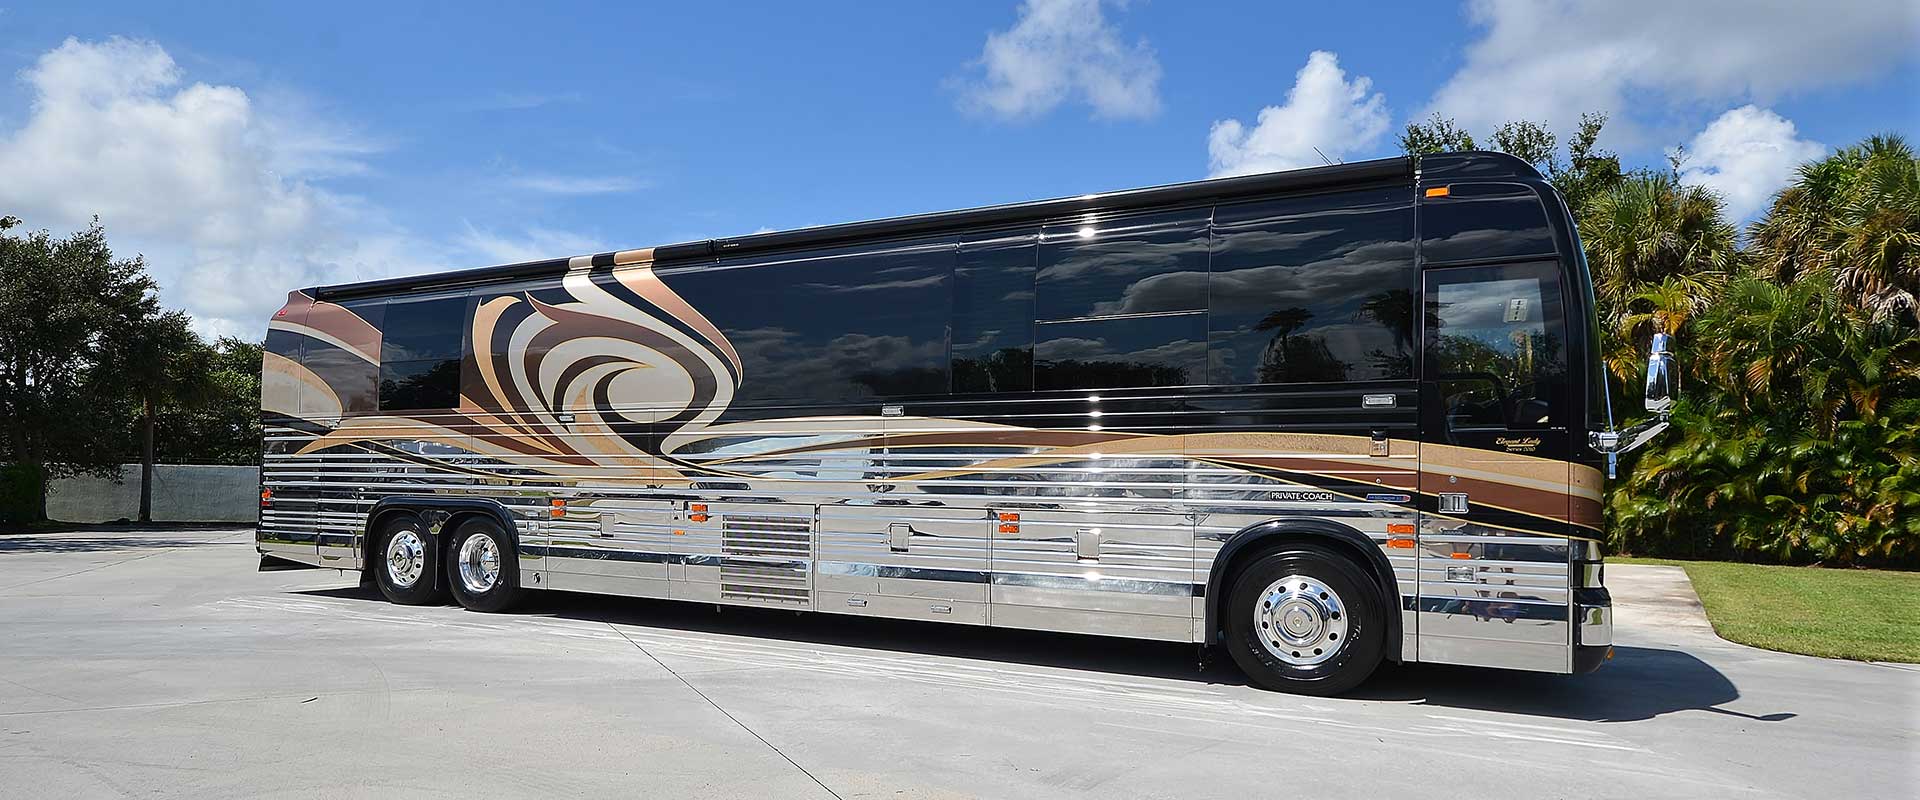 2010 Liberty Coach #882-B exterior entry side front view of motorcoach on the lot